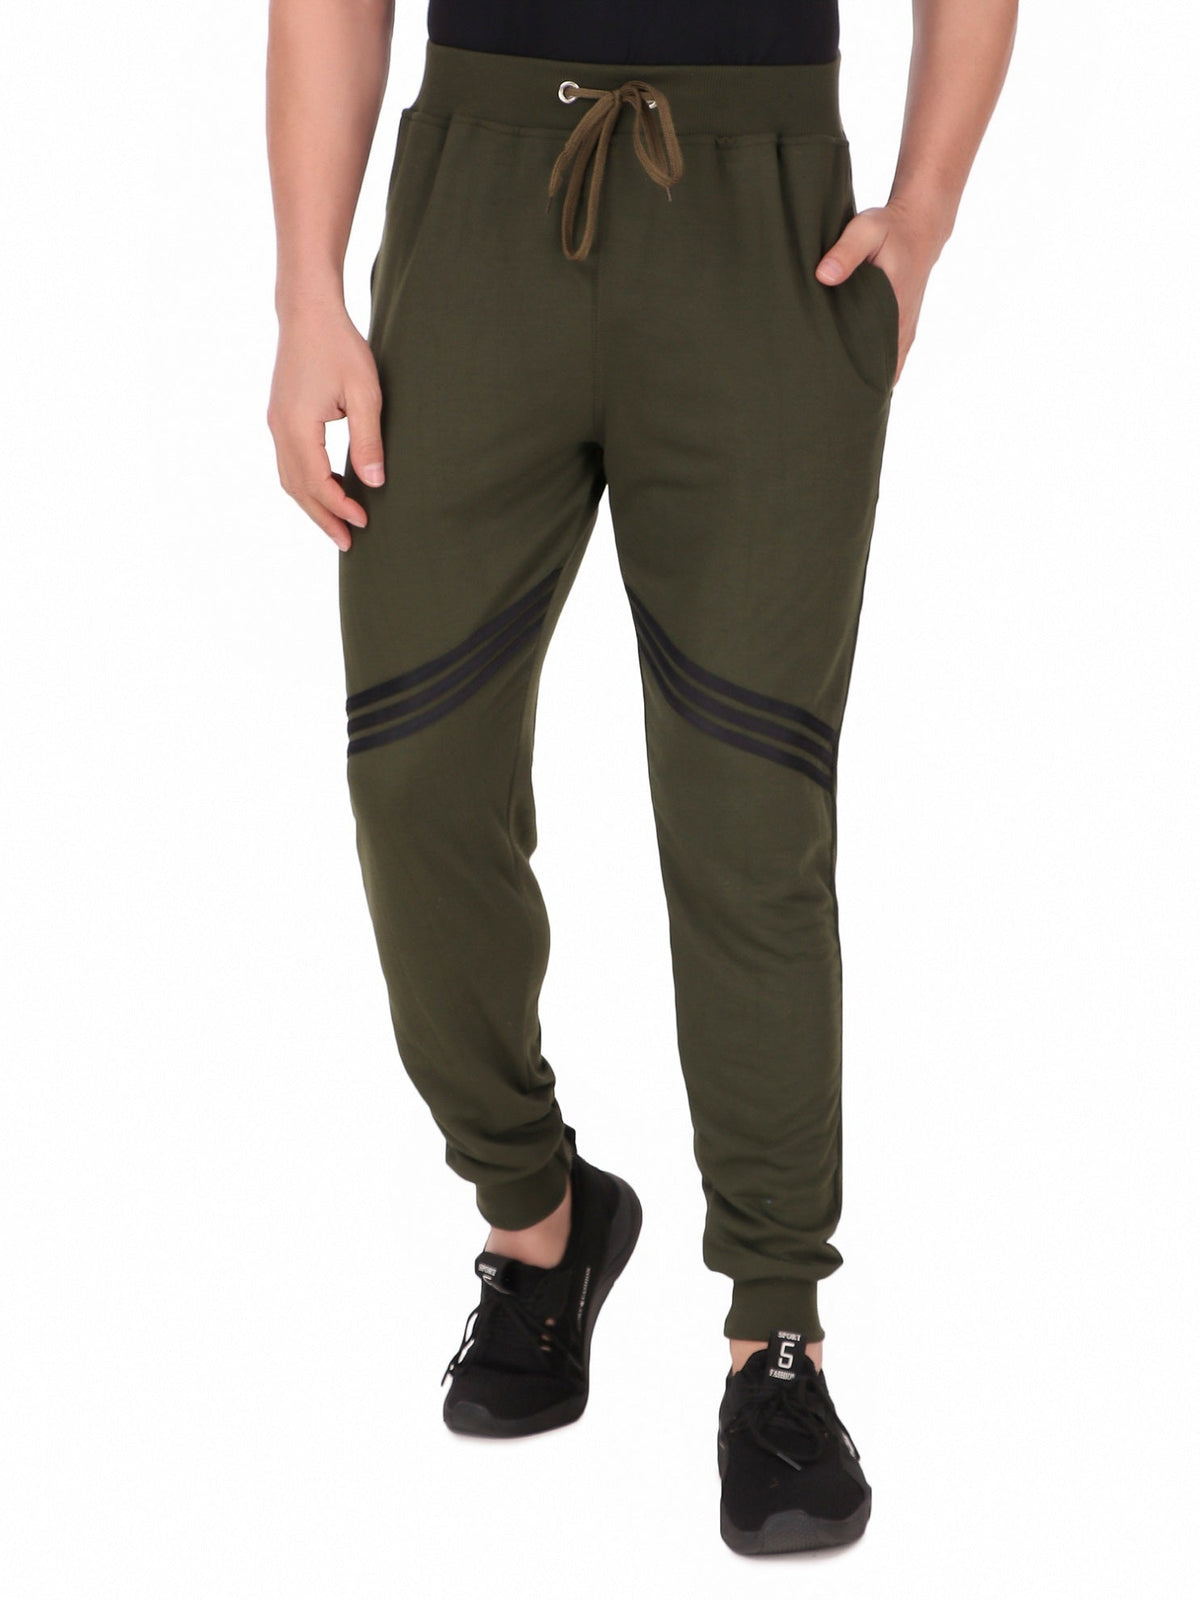 Buy JEMS Track Pant (M, Blue) at Amazon.in